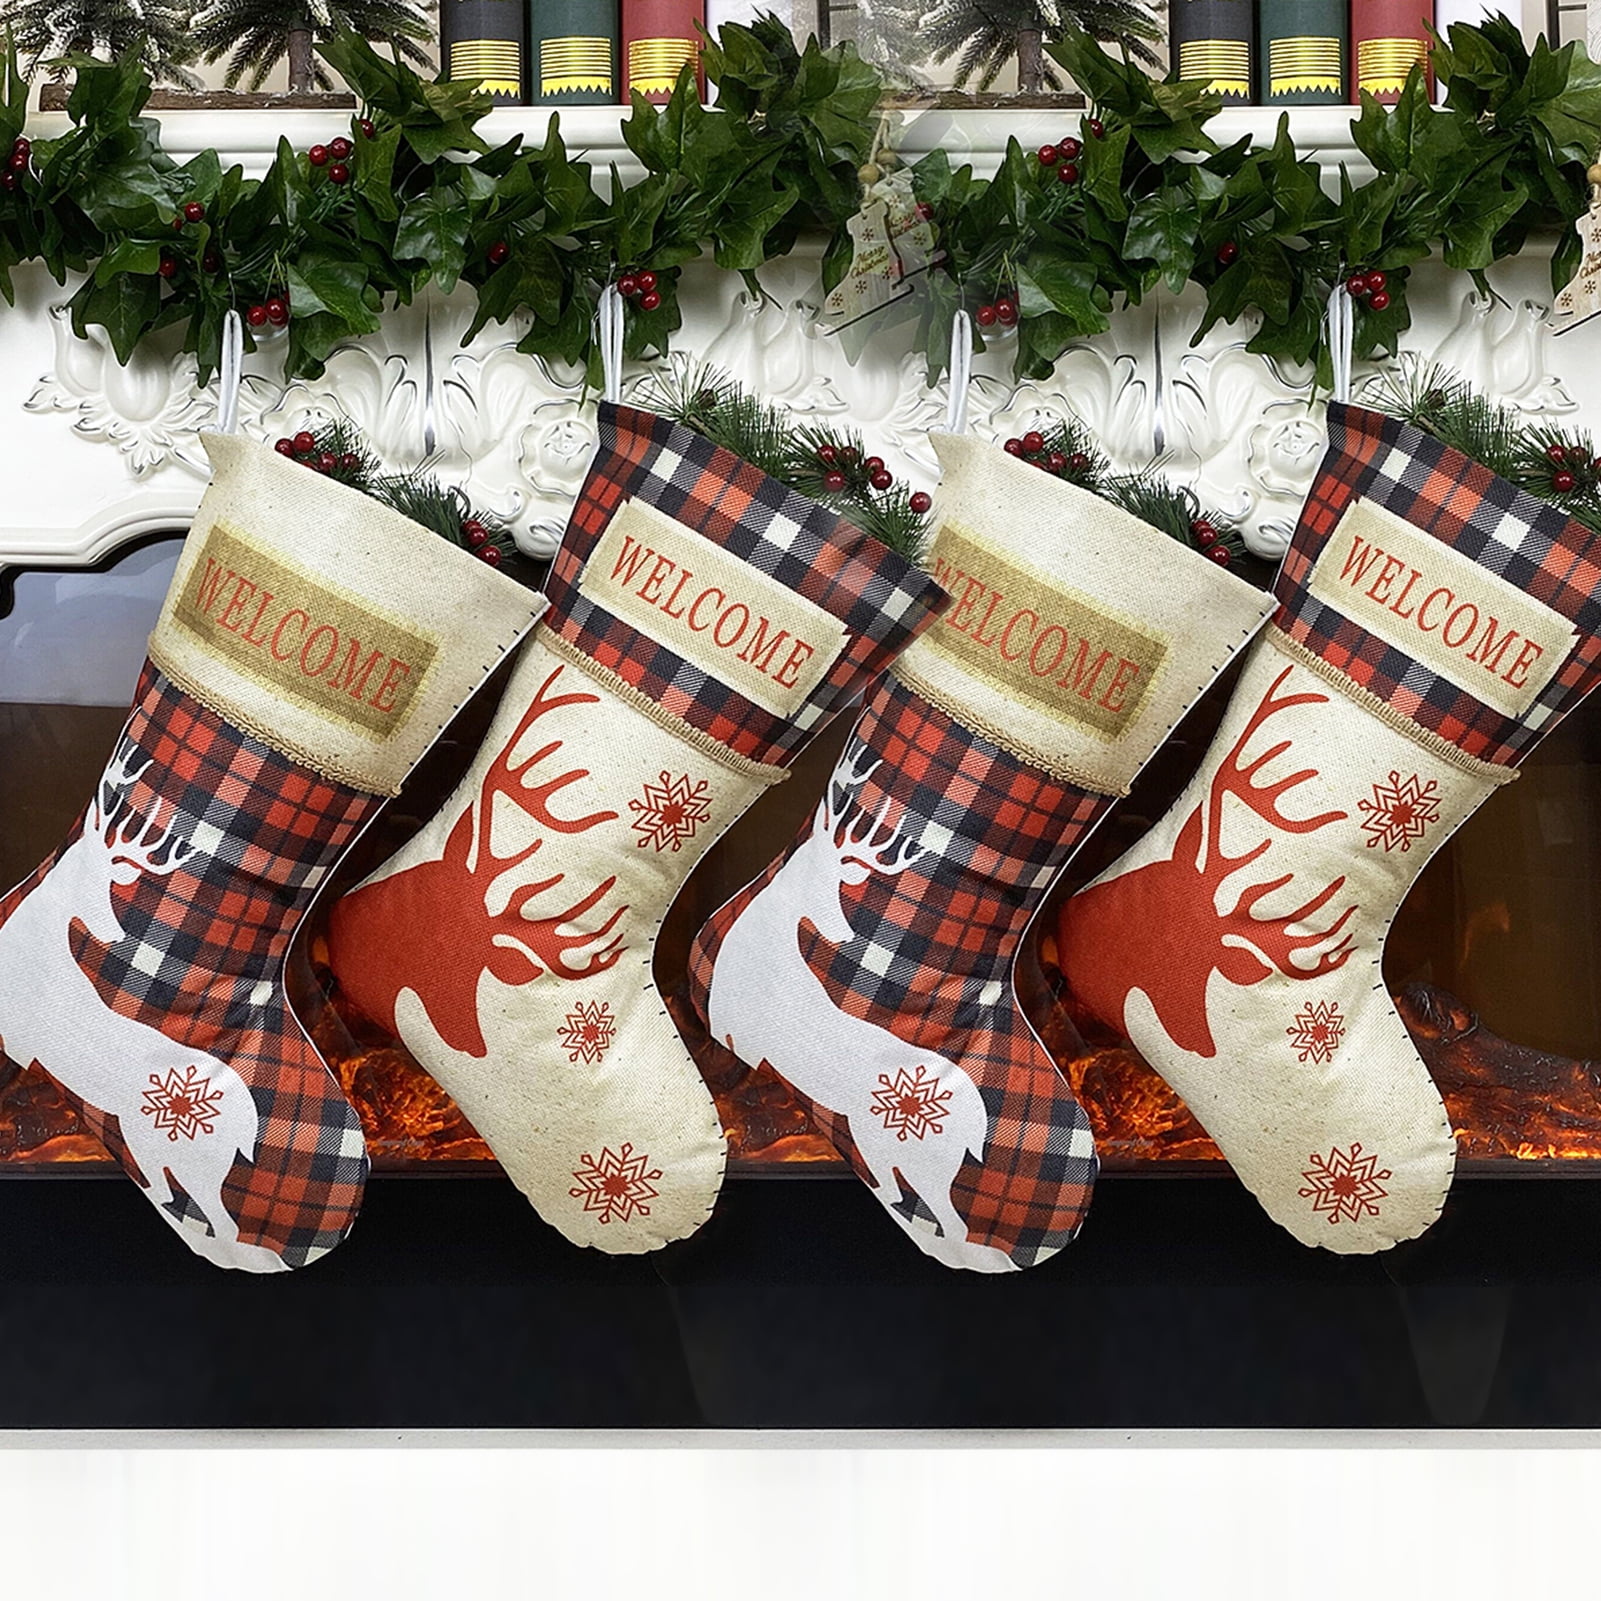 4 Pack Large Christmas Stocking,18 inches Classic Reindeer Xmas Cuff Stockings,Classic Large Stocking Decorations for Family Holiday Season Decor